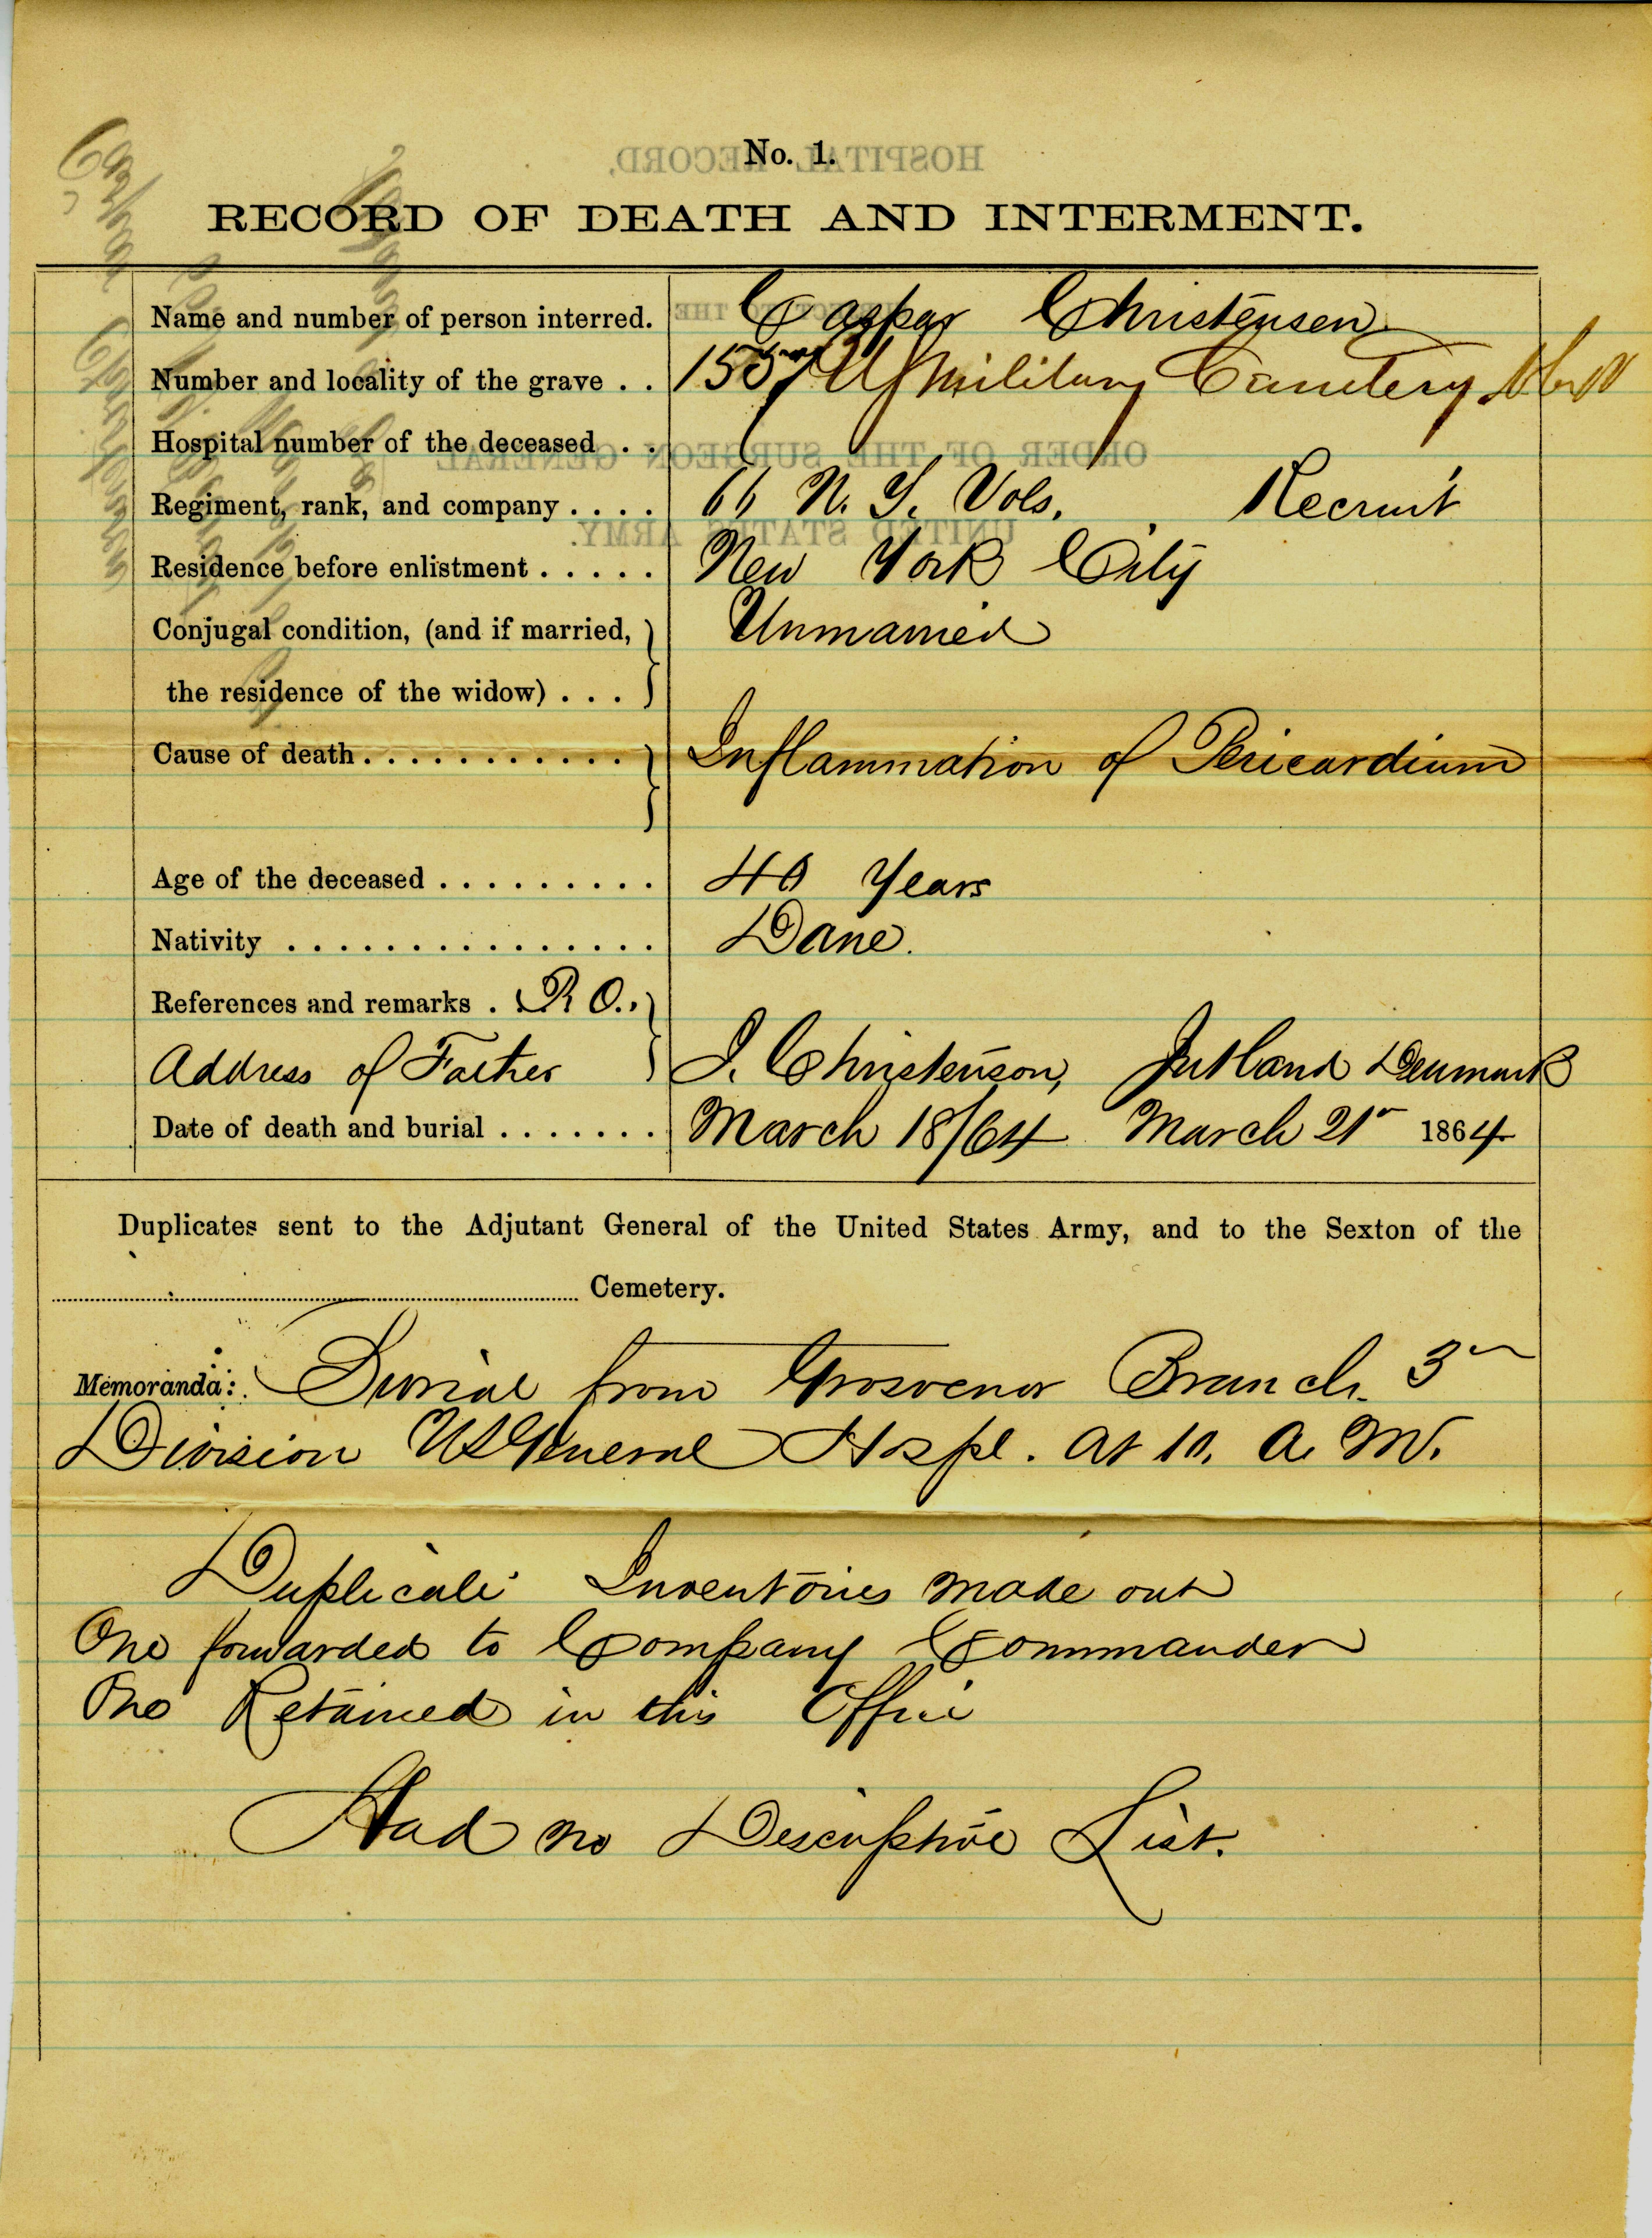 Image of a death and interment record